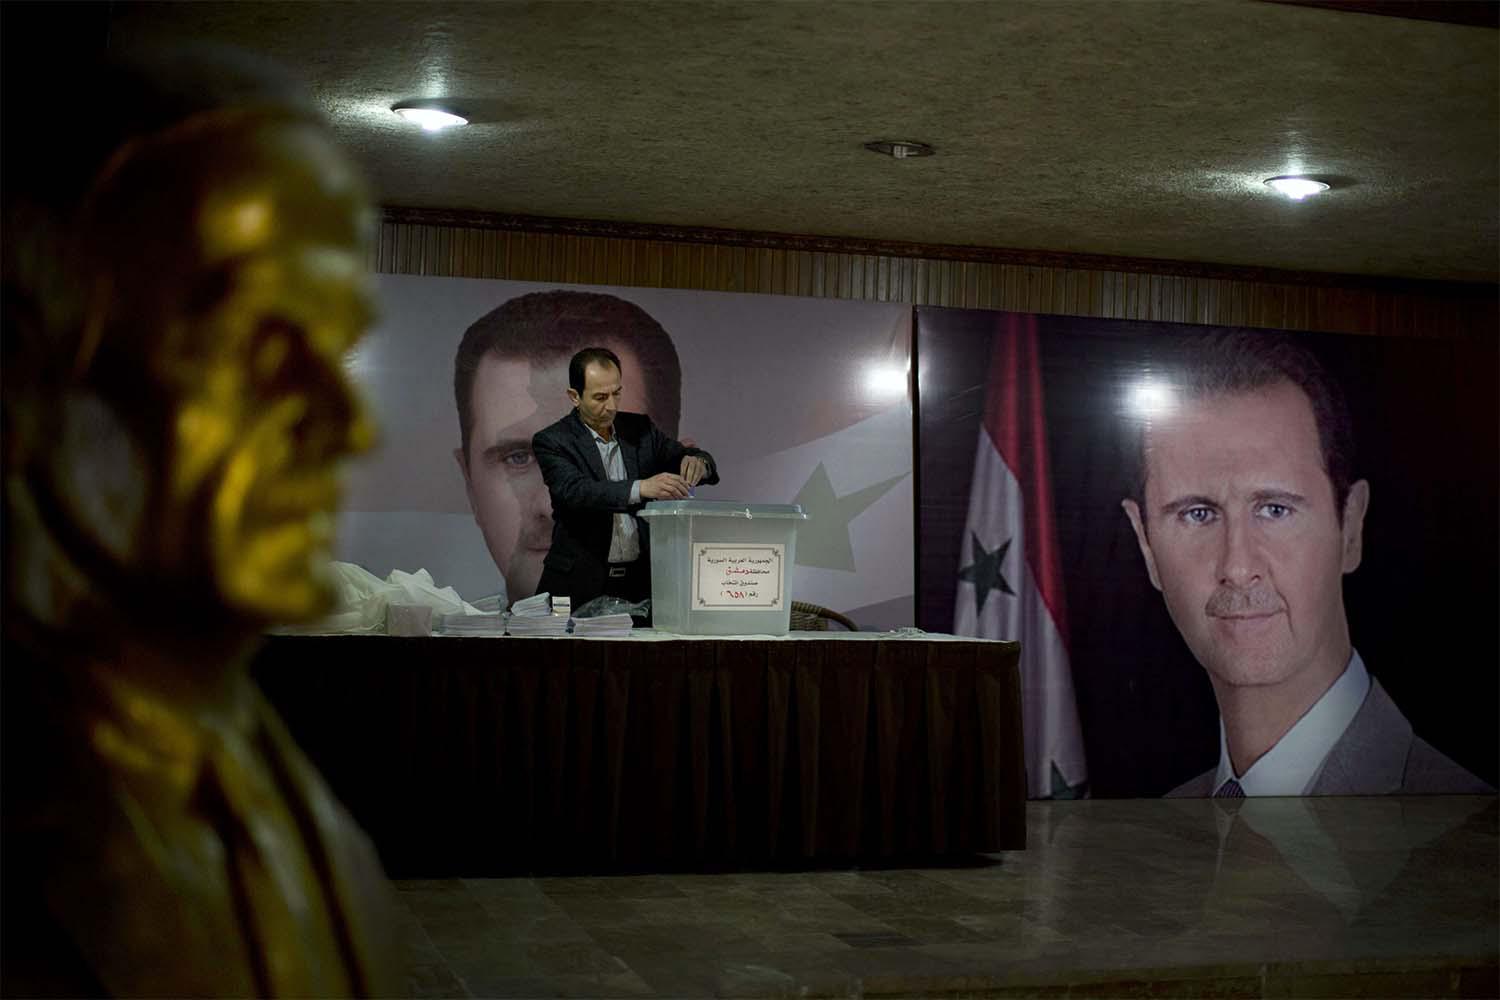 Syria's presidential elections will be held in May